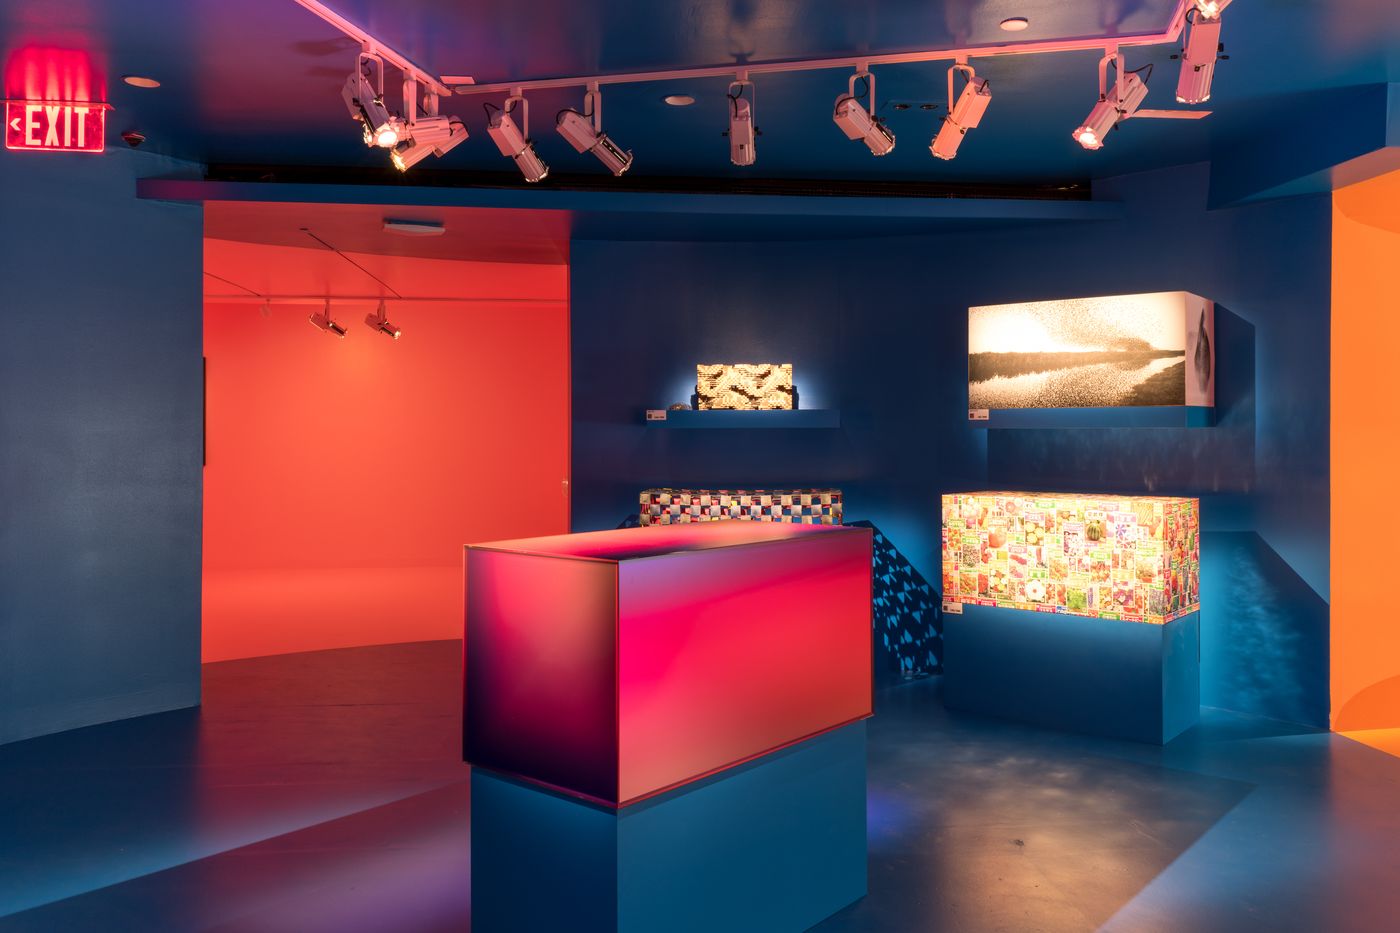 Inside Louis Vuitton's 200 Trunks, 200 Visionaries: The Exhibition in L.A.